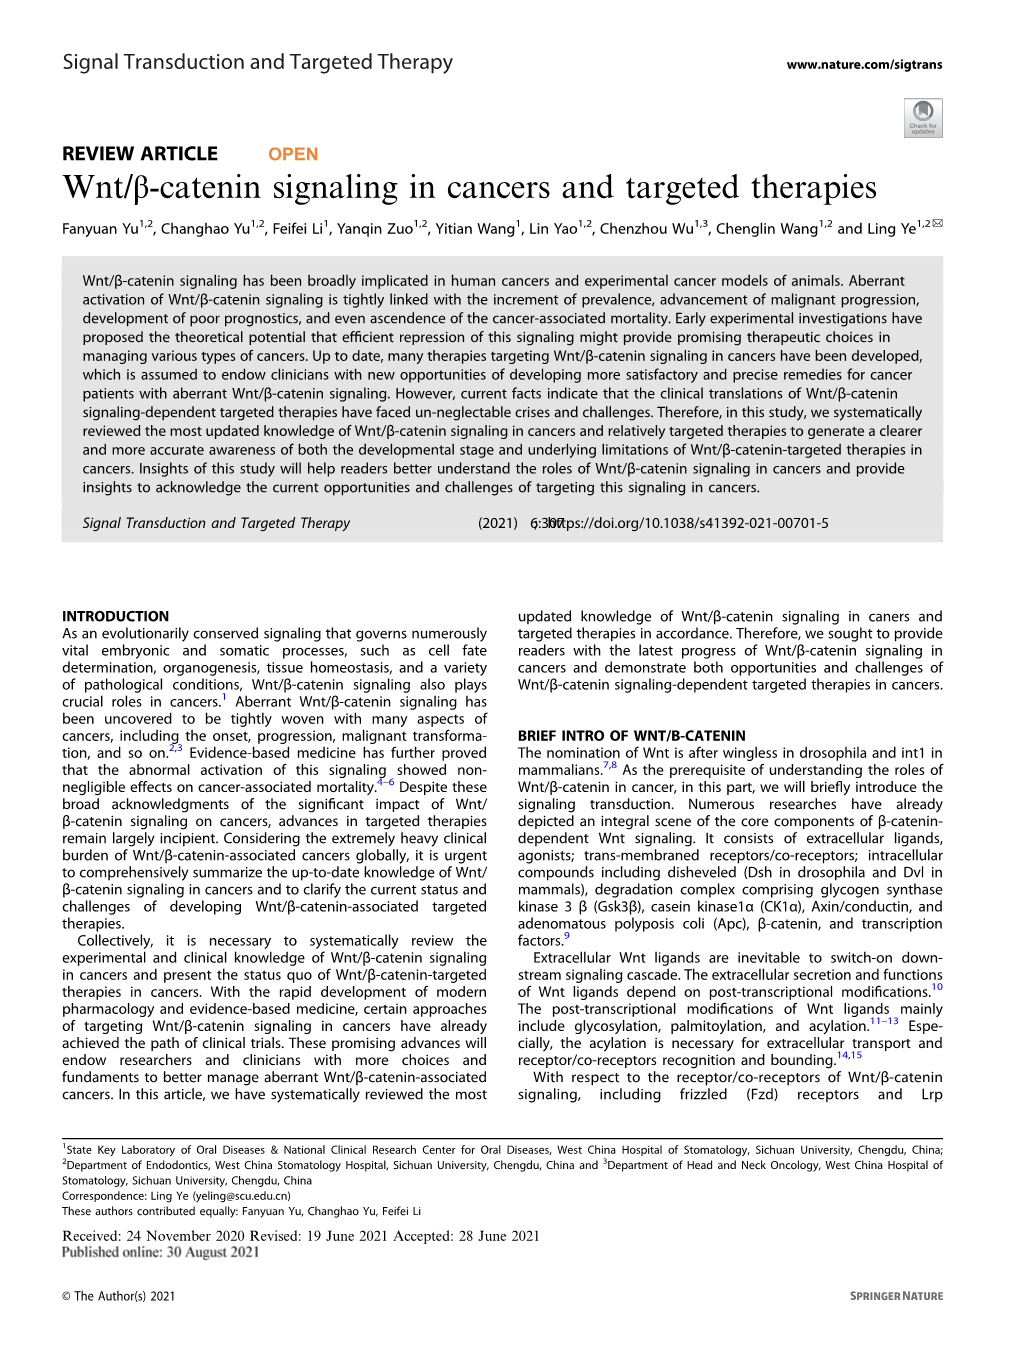 Wnt/Β-Catenin Signaling in Cancers and Targeted Therapies